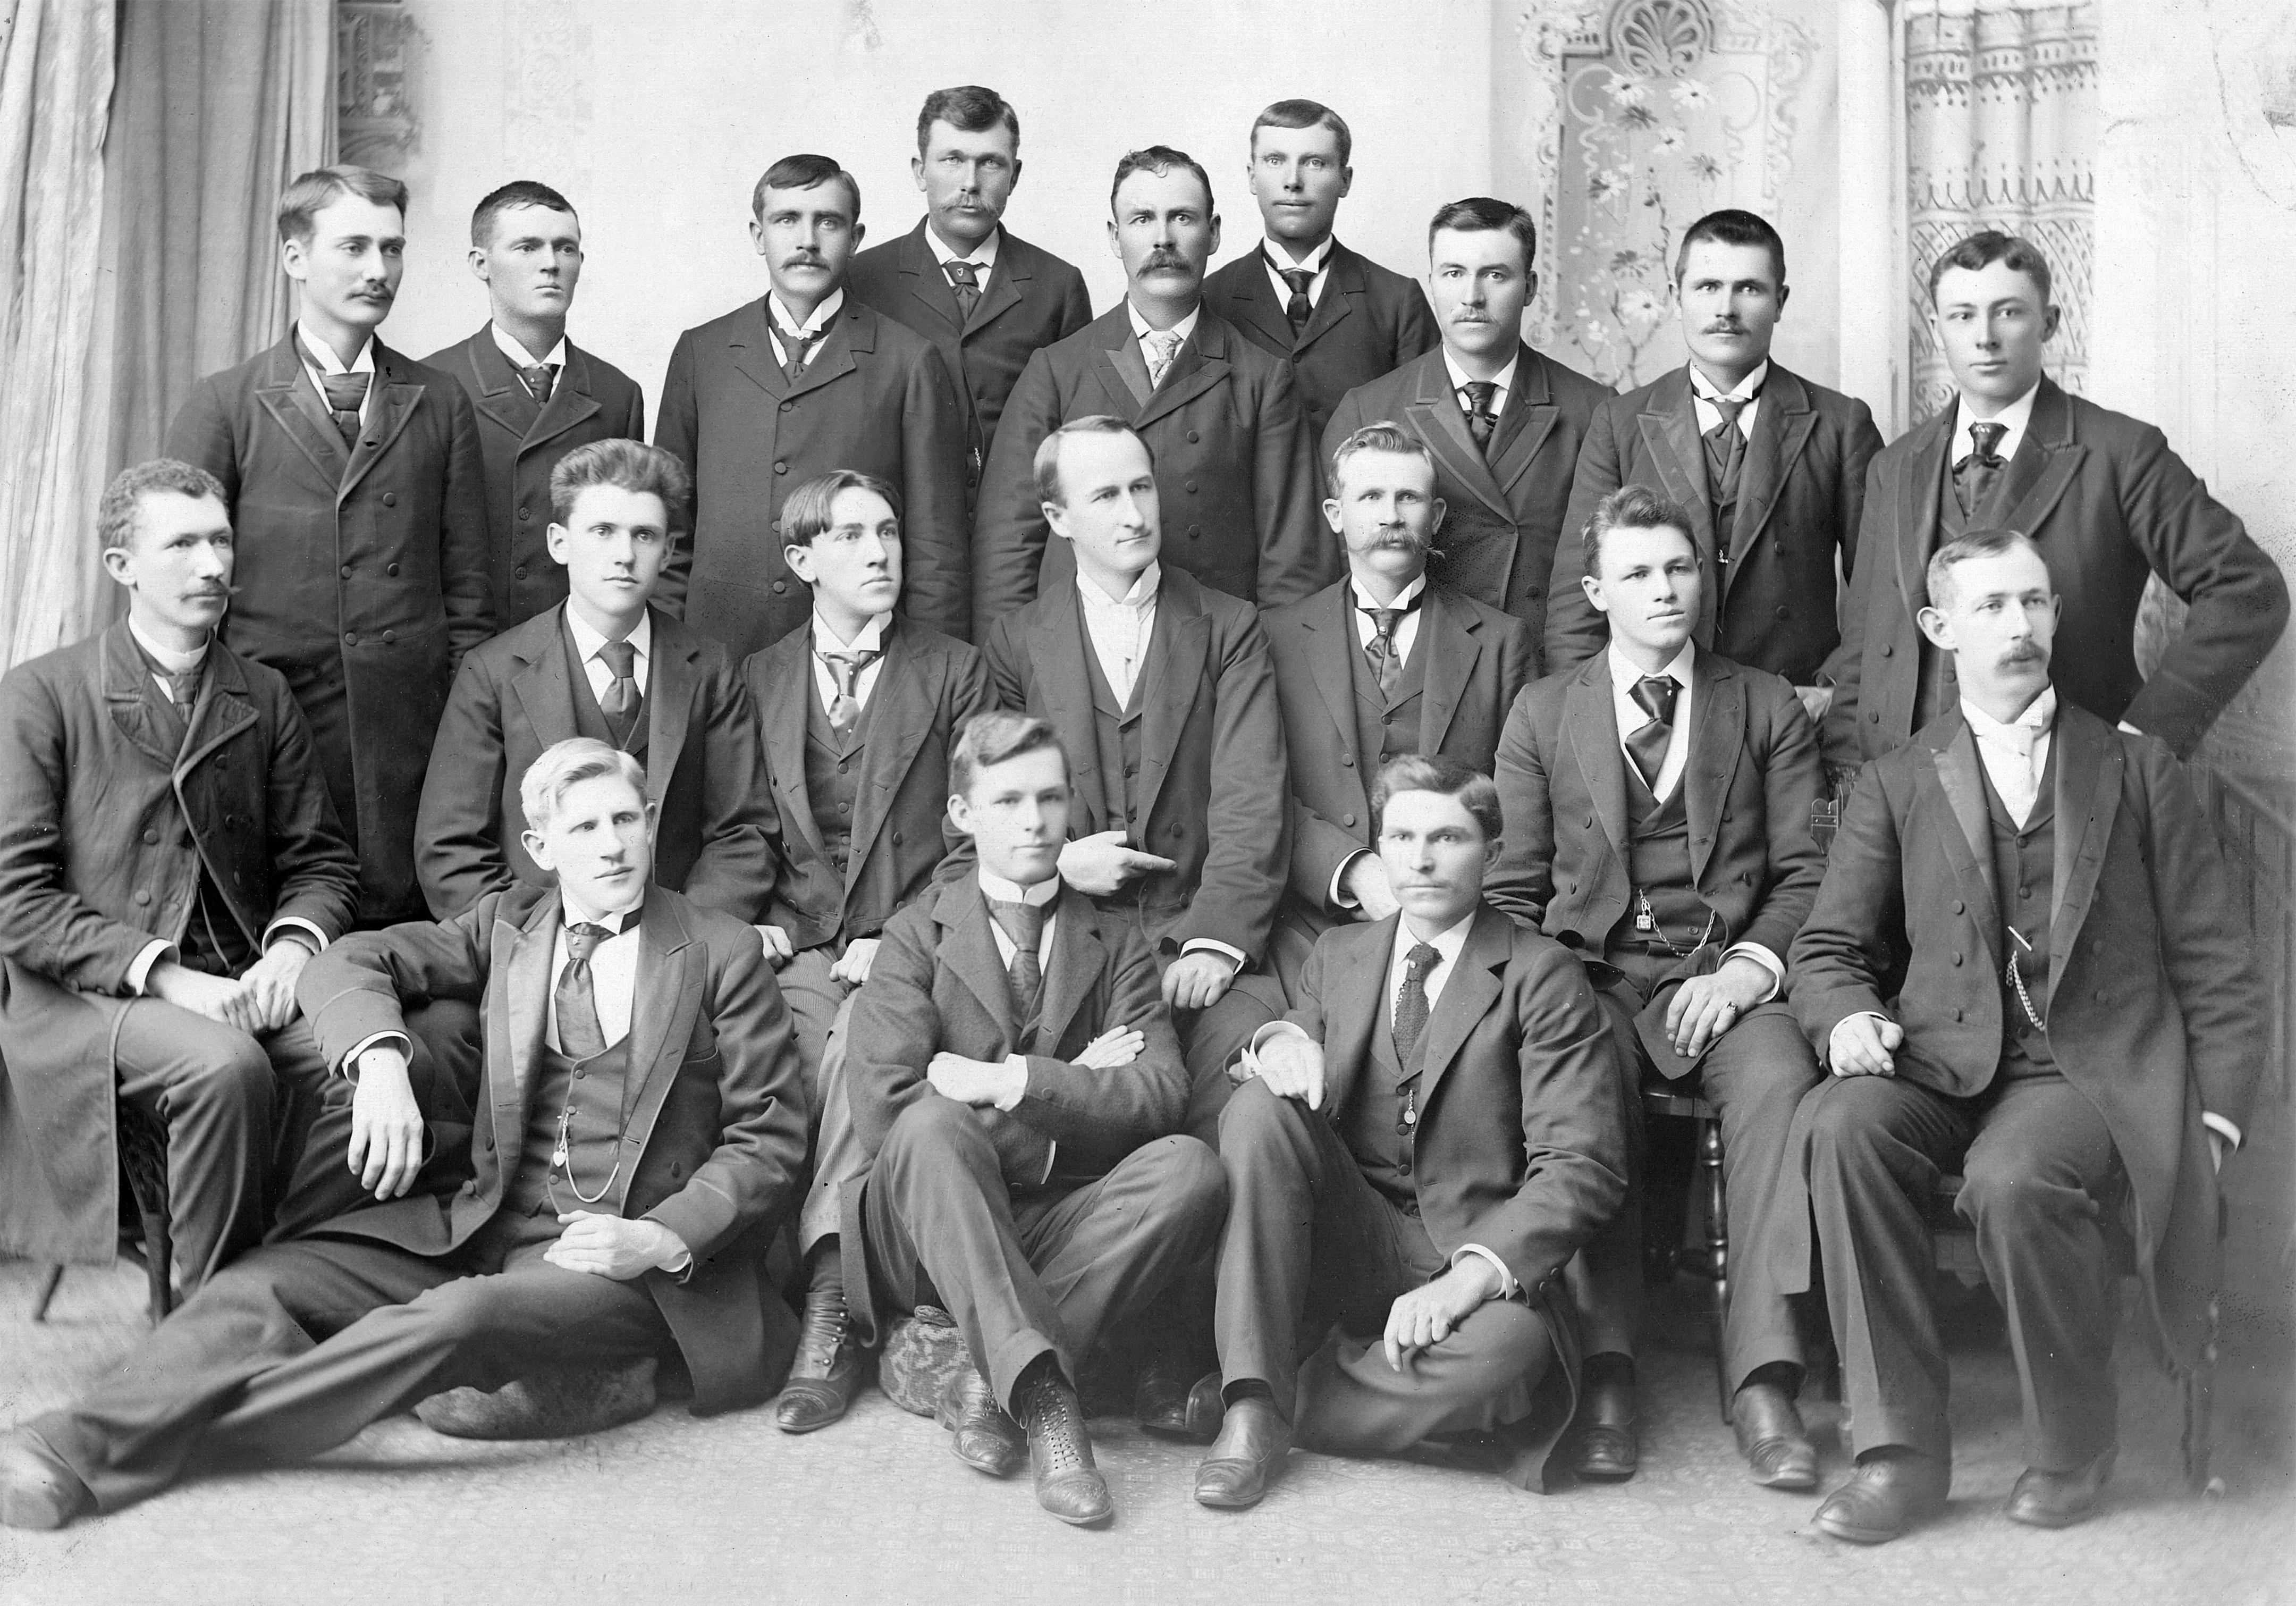 1895/2: New Missionaries - Southern States Mission - 22 February 1895)